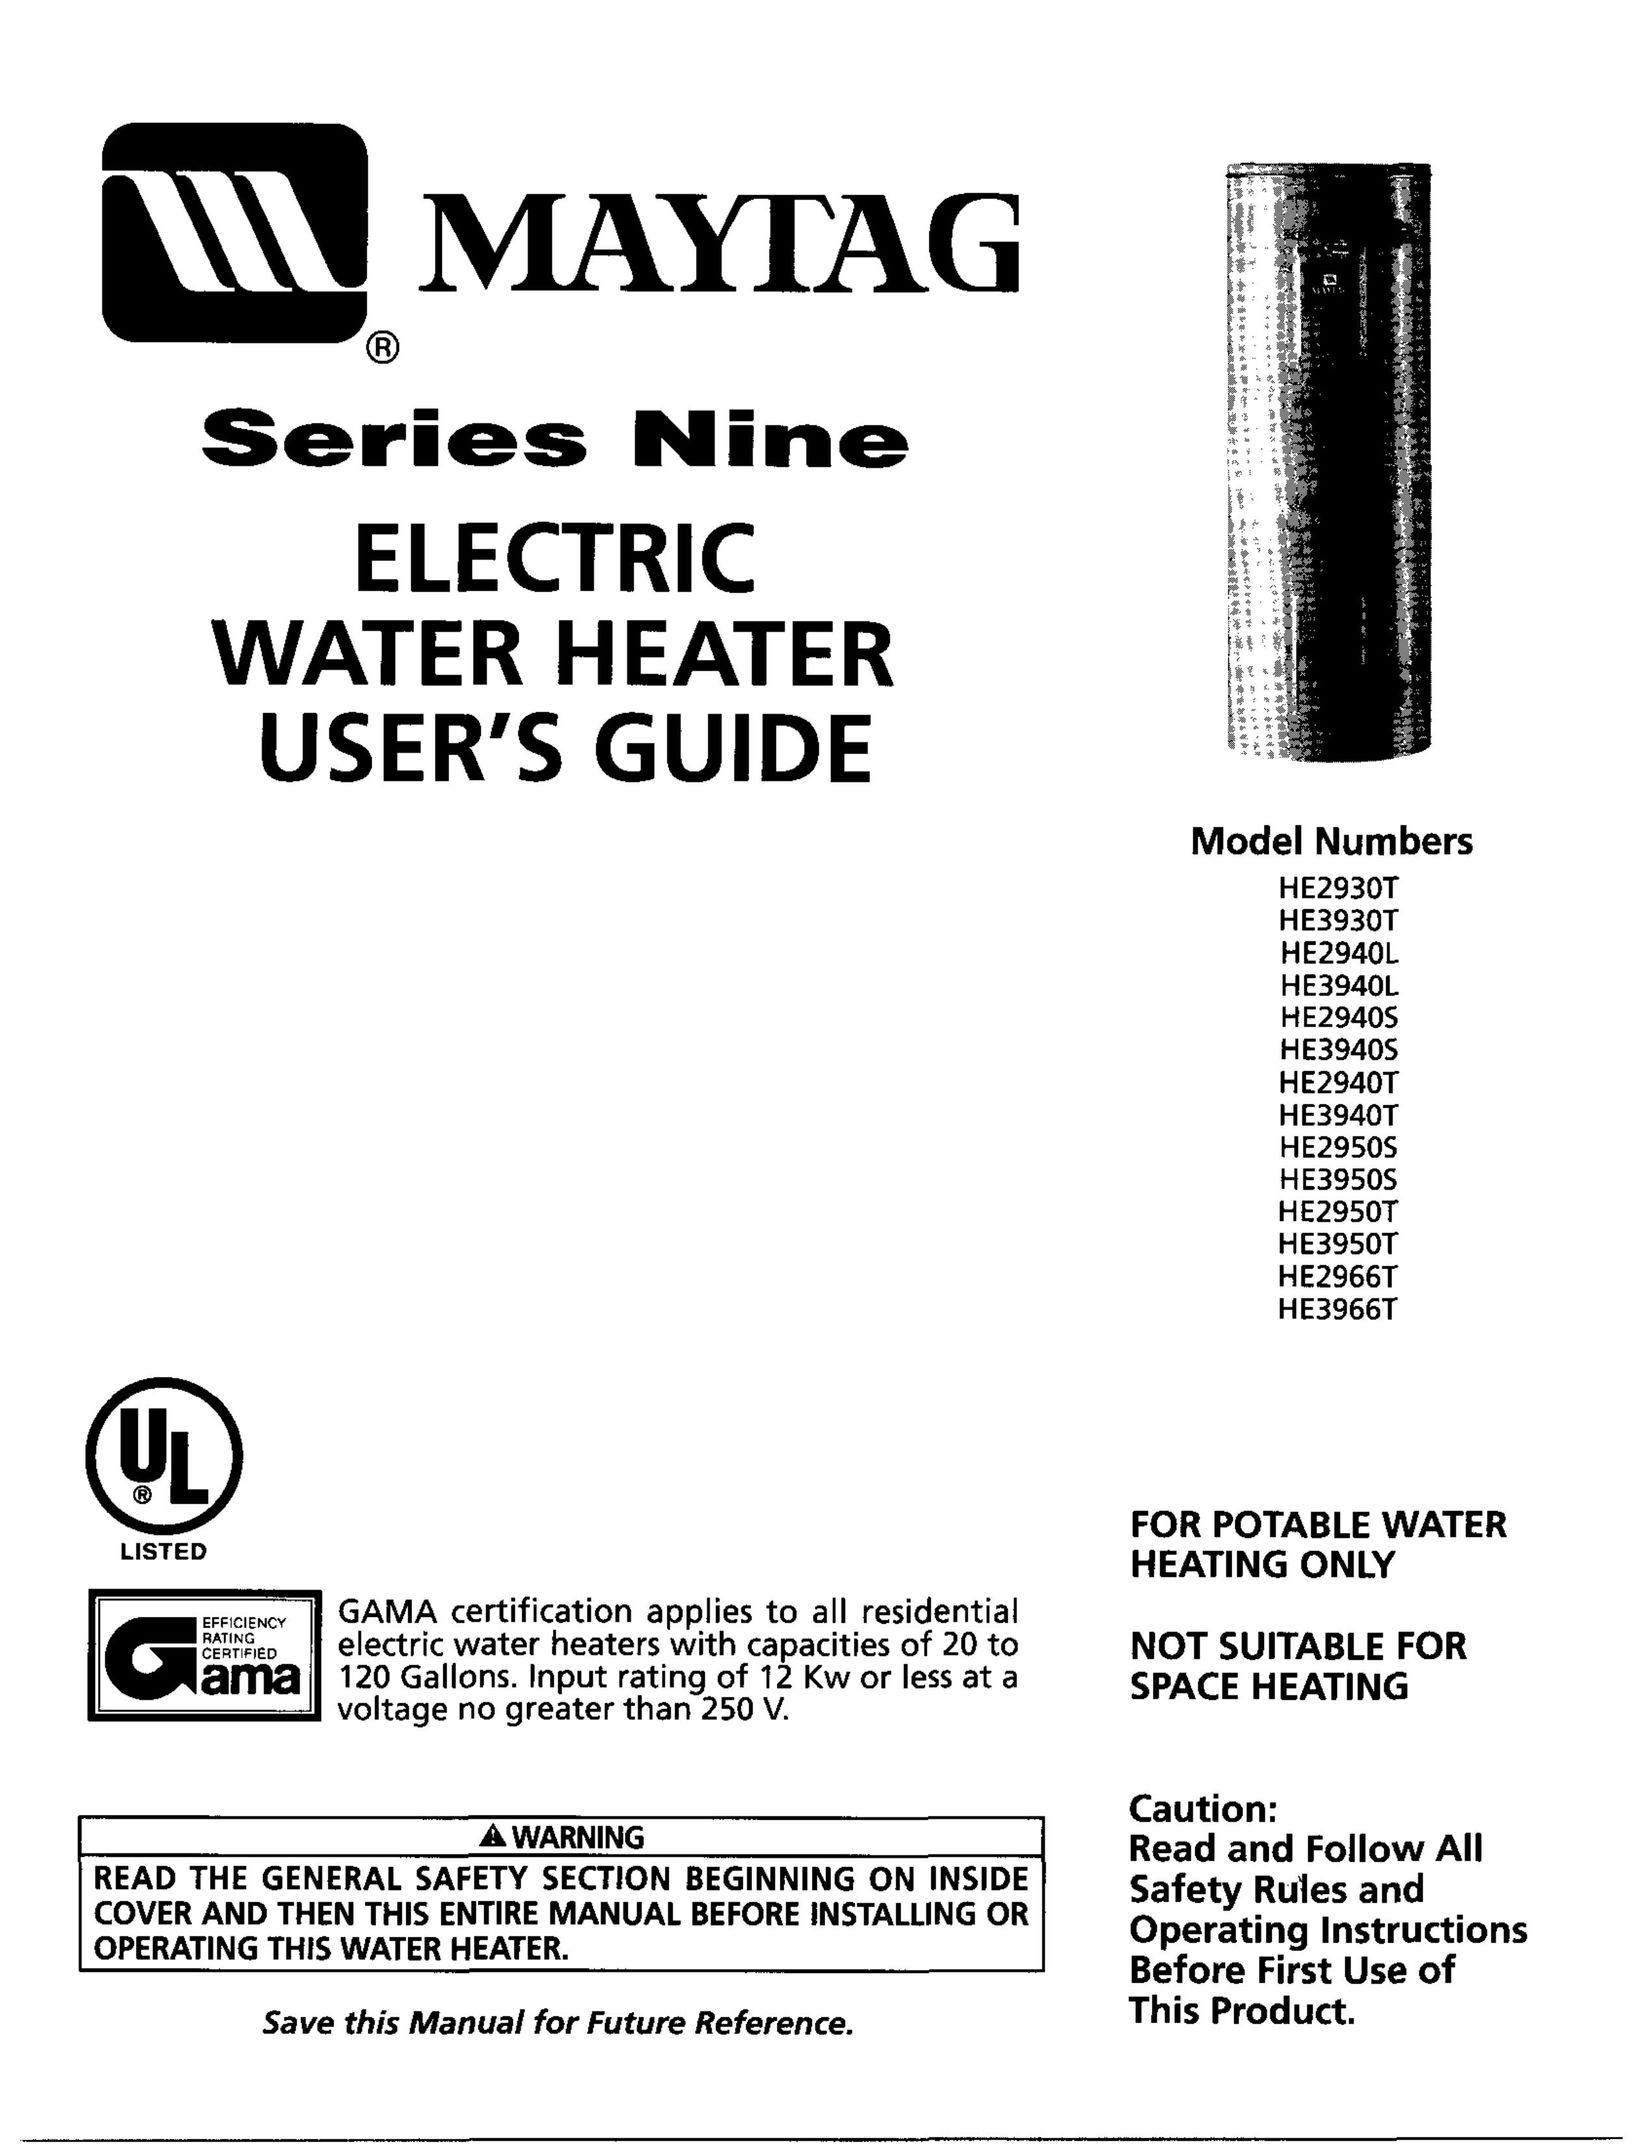 Maytag HE3950S Water Heater User Manual